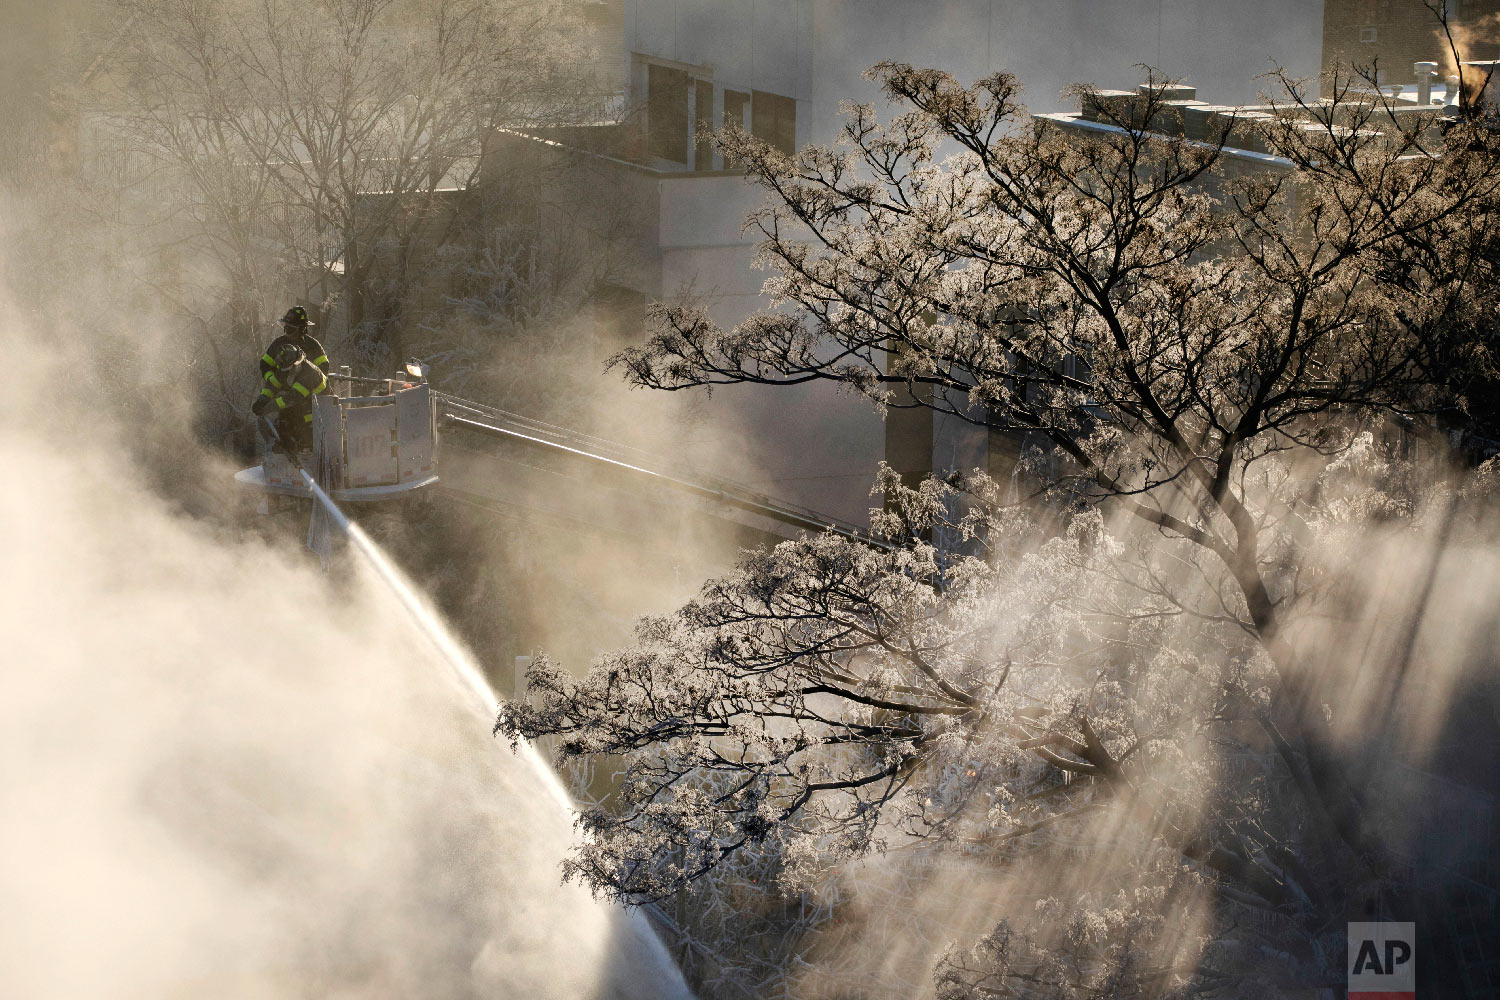  Ice forms on tree branches as New York firefighters battle a blaze in a commercial building in the Bedford Stuyvesant neighborhood of Brooklyn, Thursday, Jan. 31, 2019 in New York. (AP Photo/Mark Lennihan) 